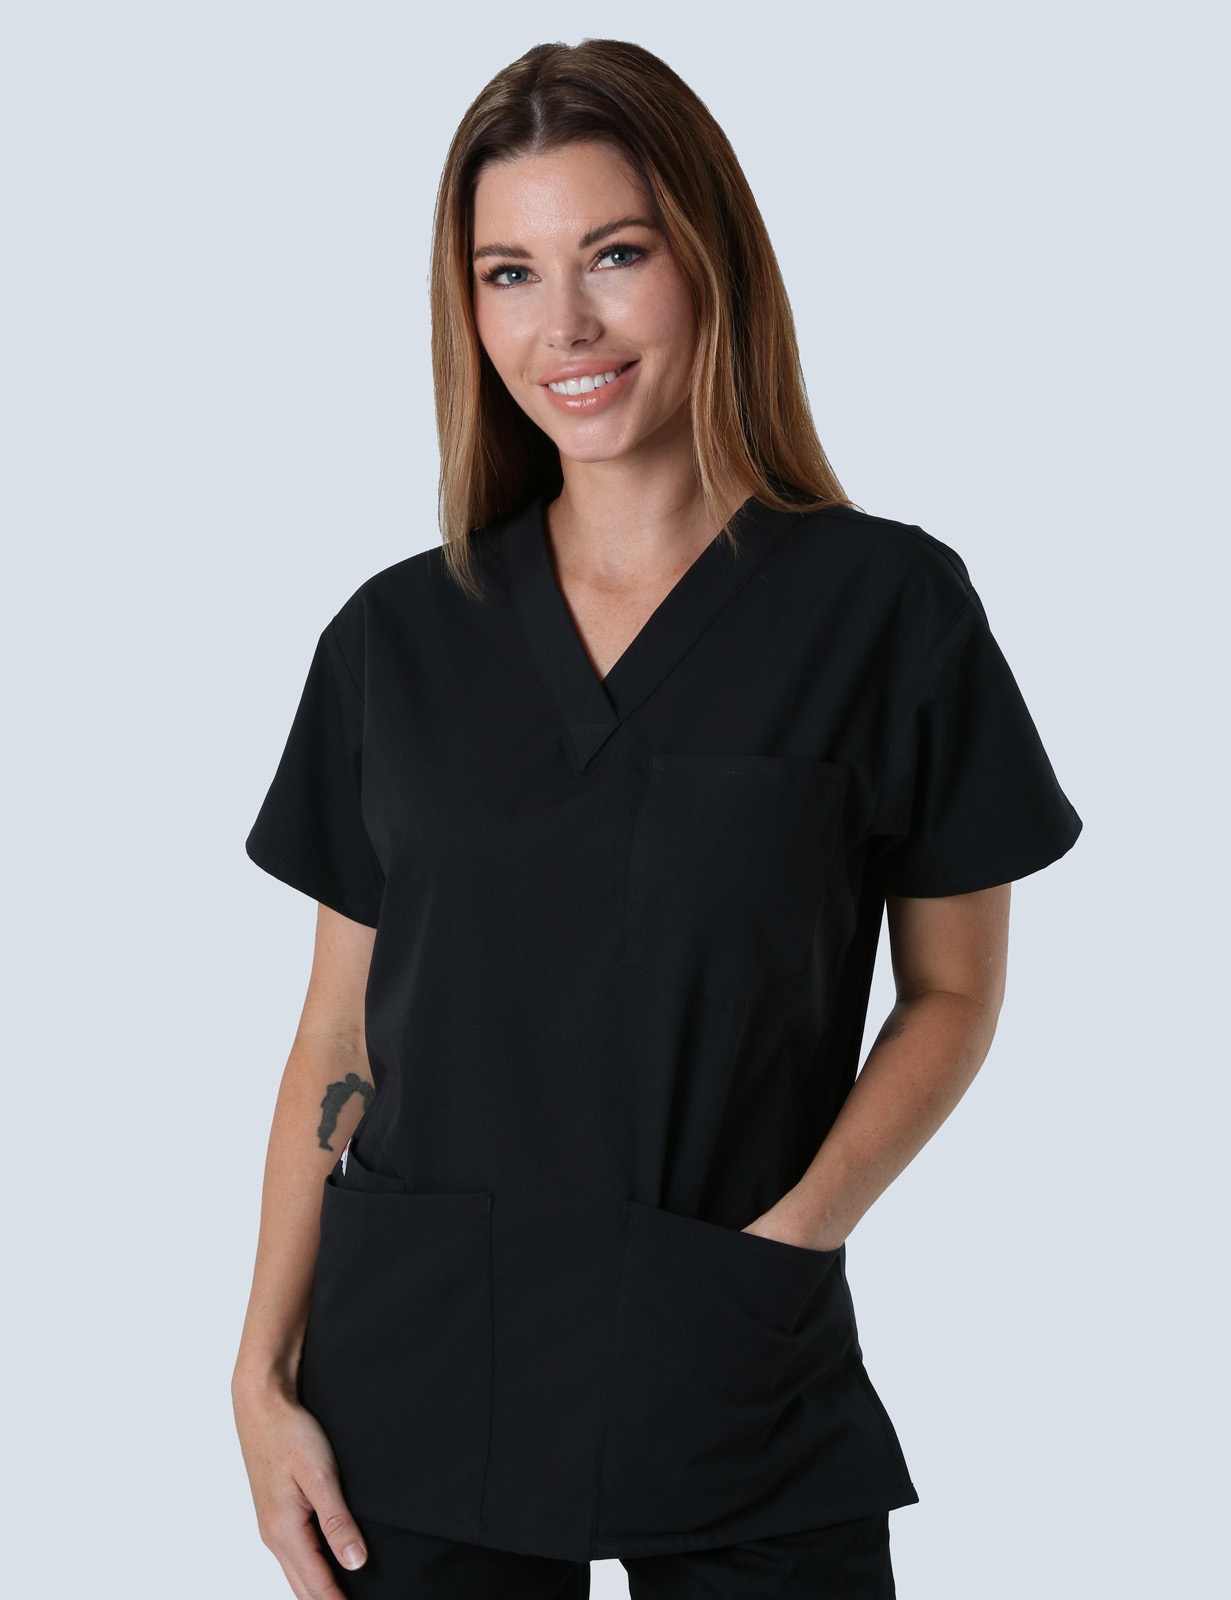 Northpark Private - ED AUM (4 Pocket Scrub Top and Regular Pants in Black incl Logos)